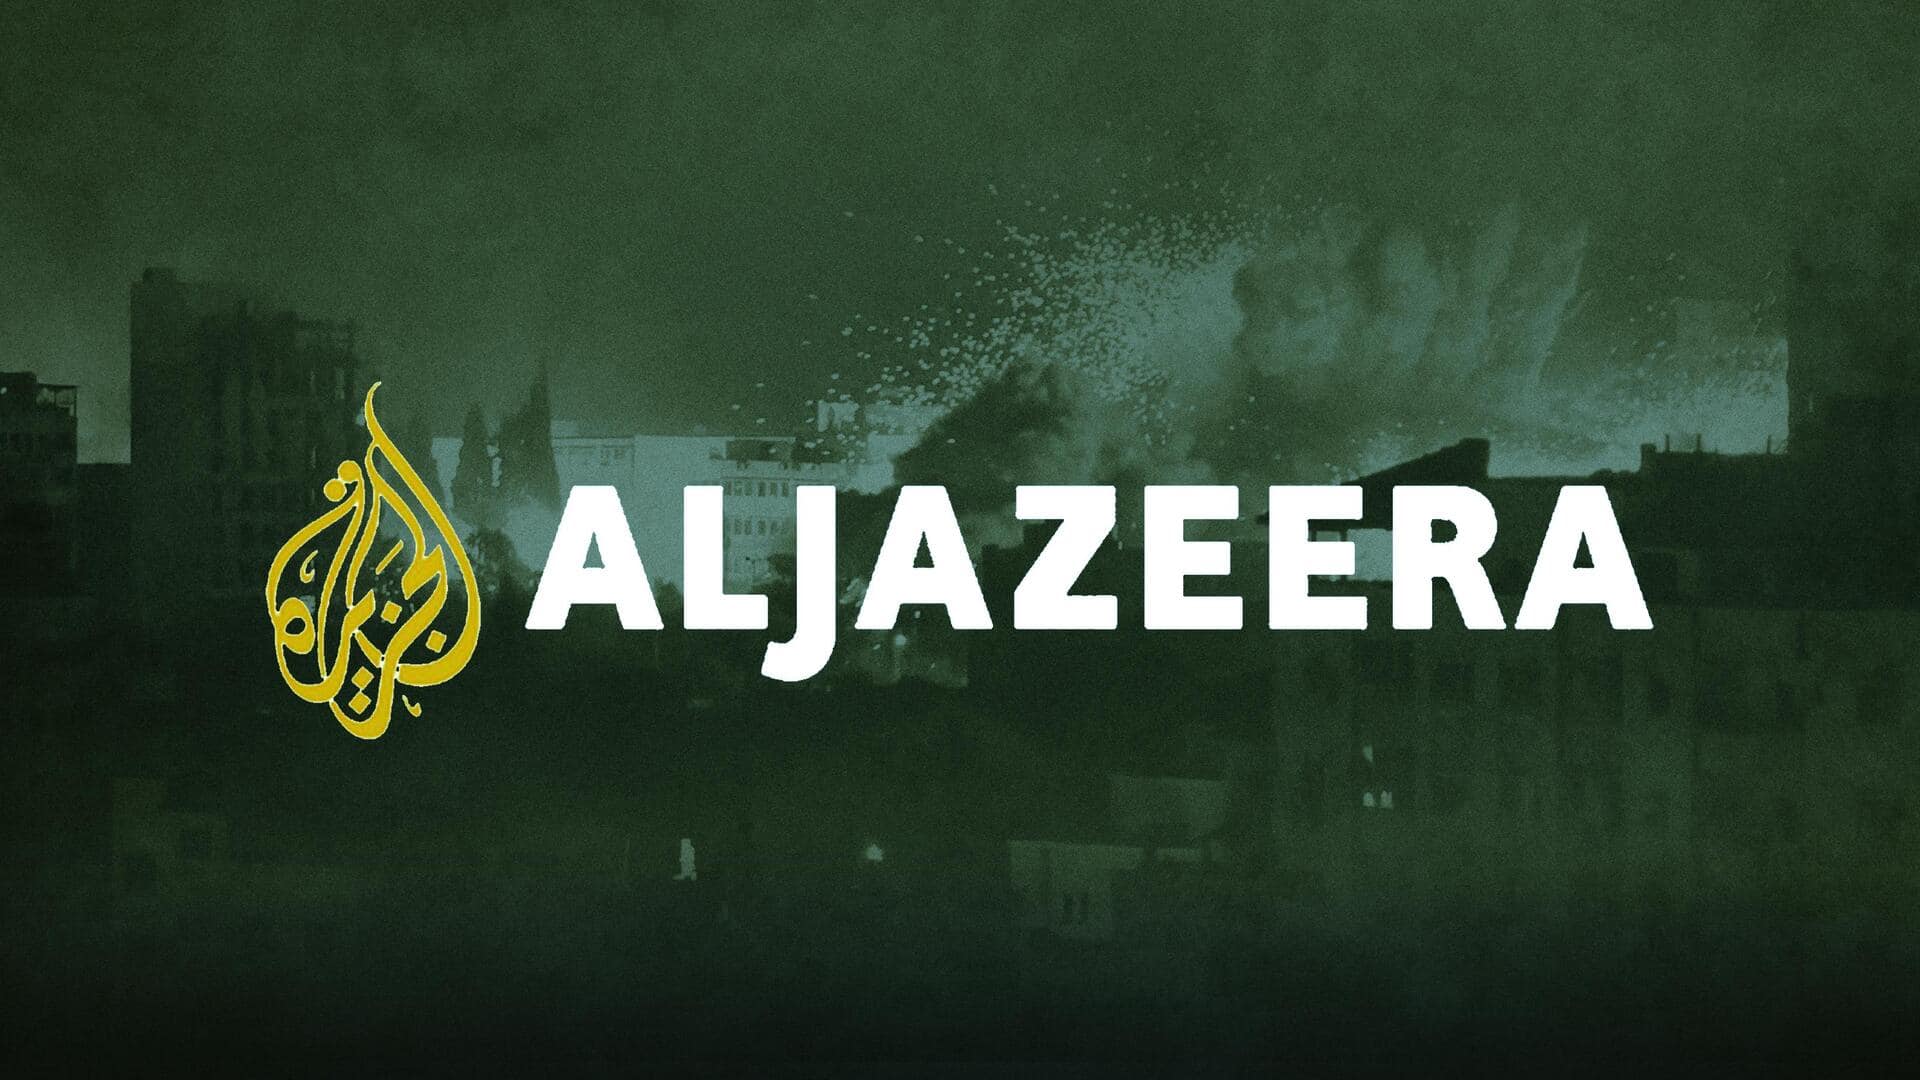 National security: Israel approves regulation to close Al Jazeera offices